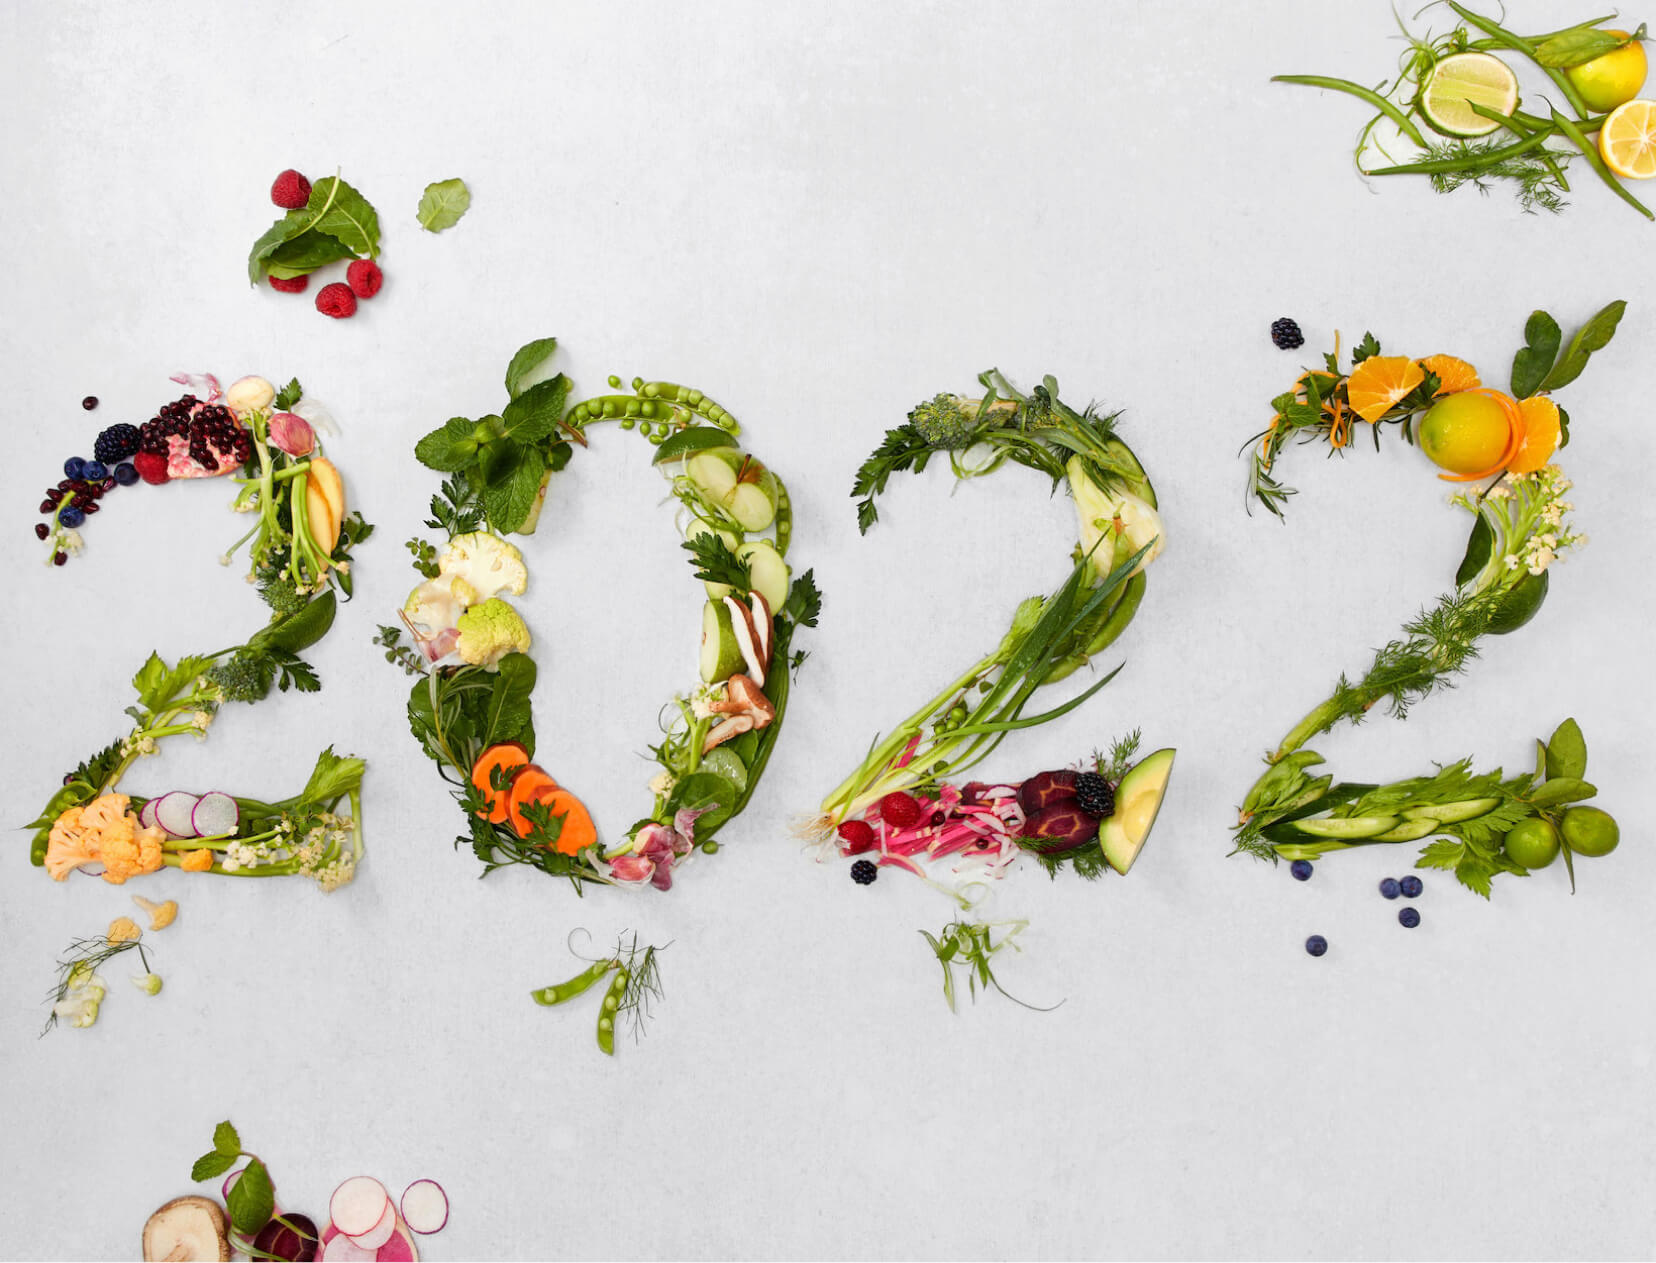 The Annual New Year Detox: 2022 Edition